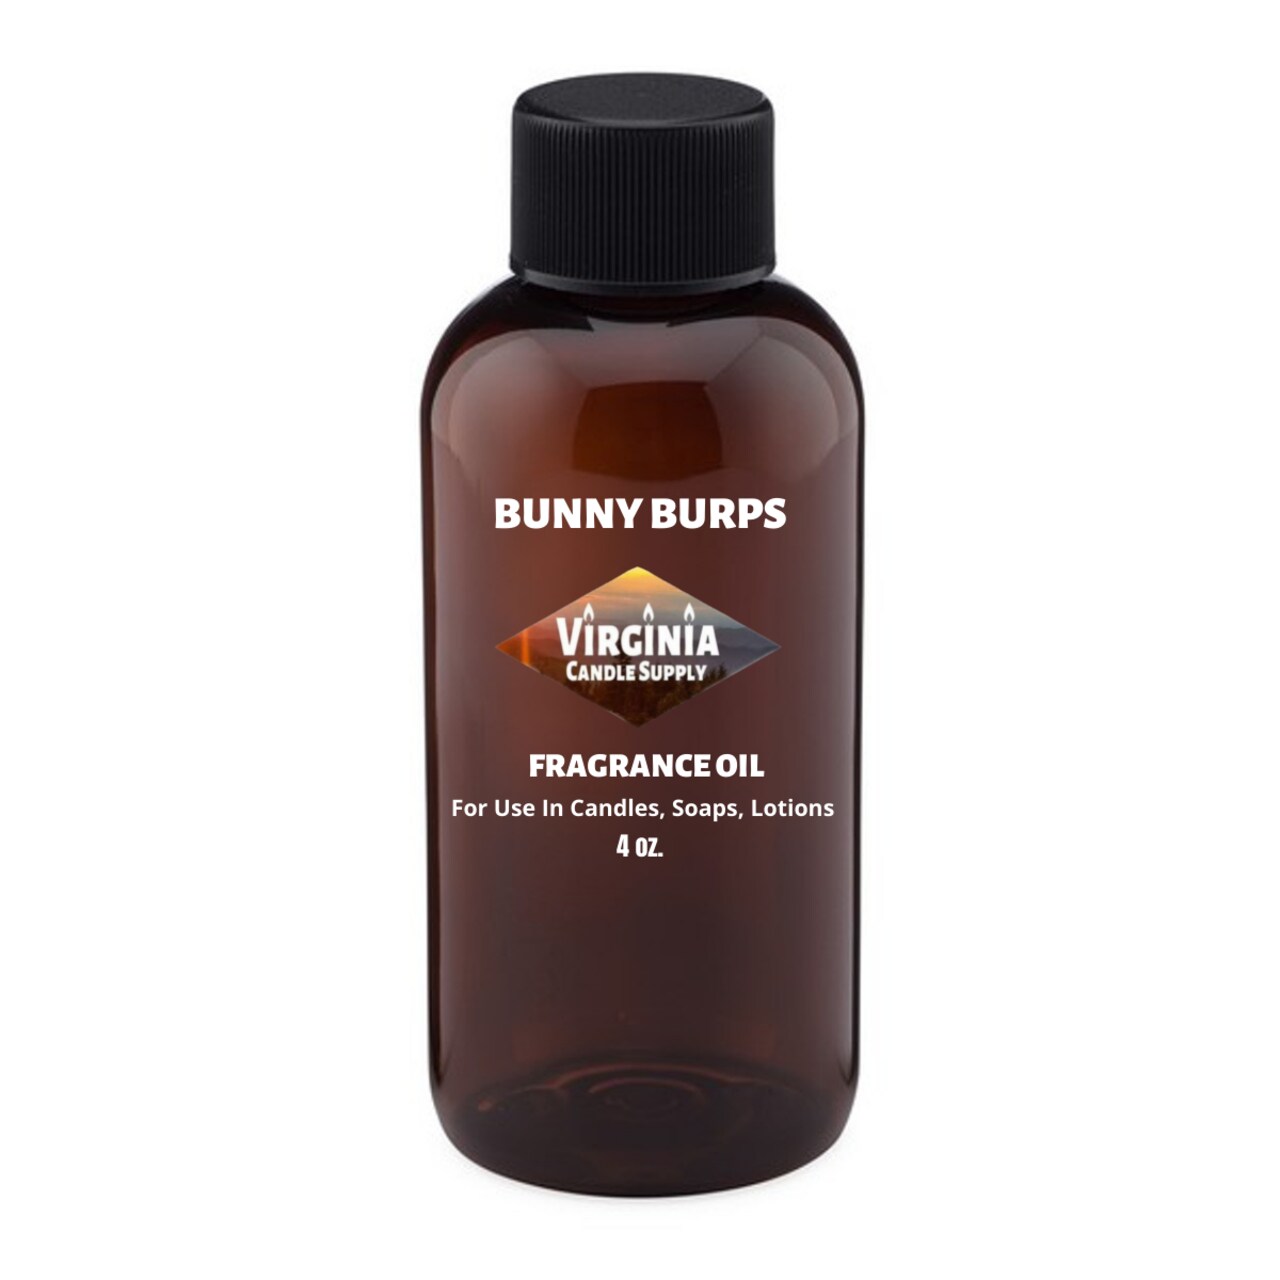 Bunny Burps Fragrance Oil (Our Version of the Brand Name) (4 oz Bottle) for Candle Making, Soap Making, Tart Making, Room Sprays, Lotions, Car Fresheners, Slime, Bath Bombs, Warmers&#x2026;